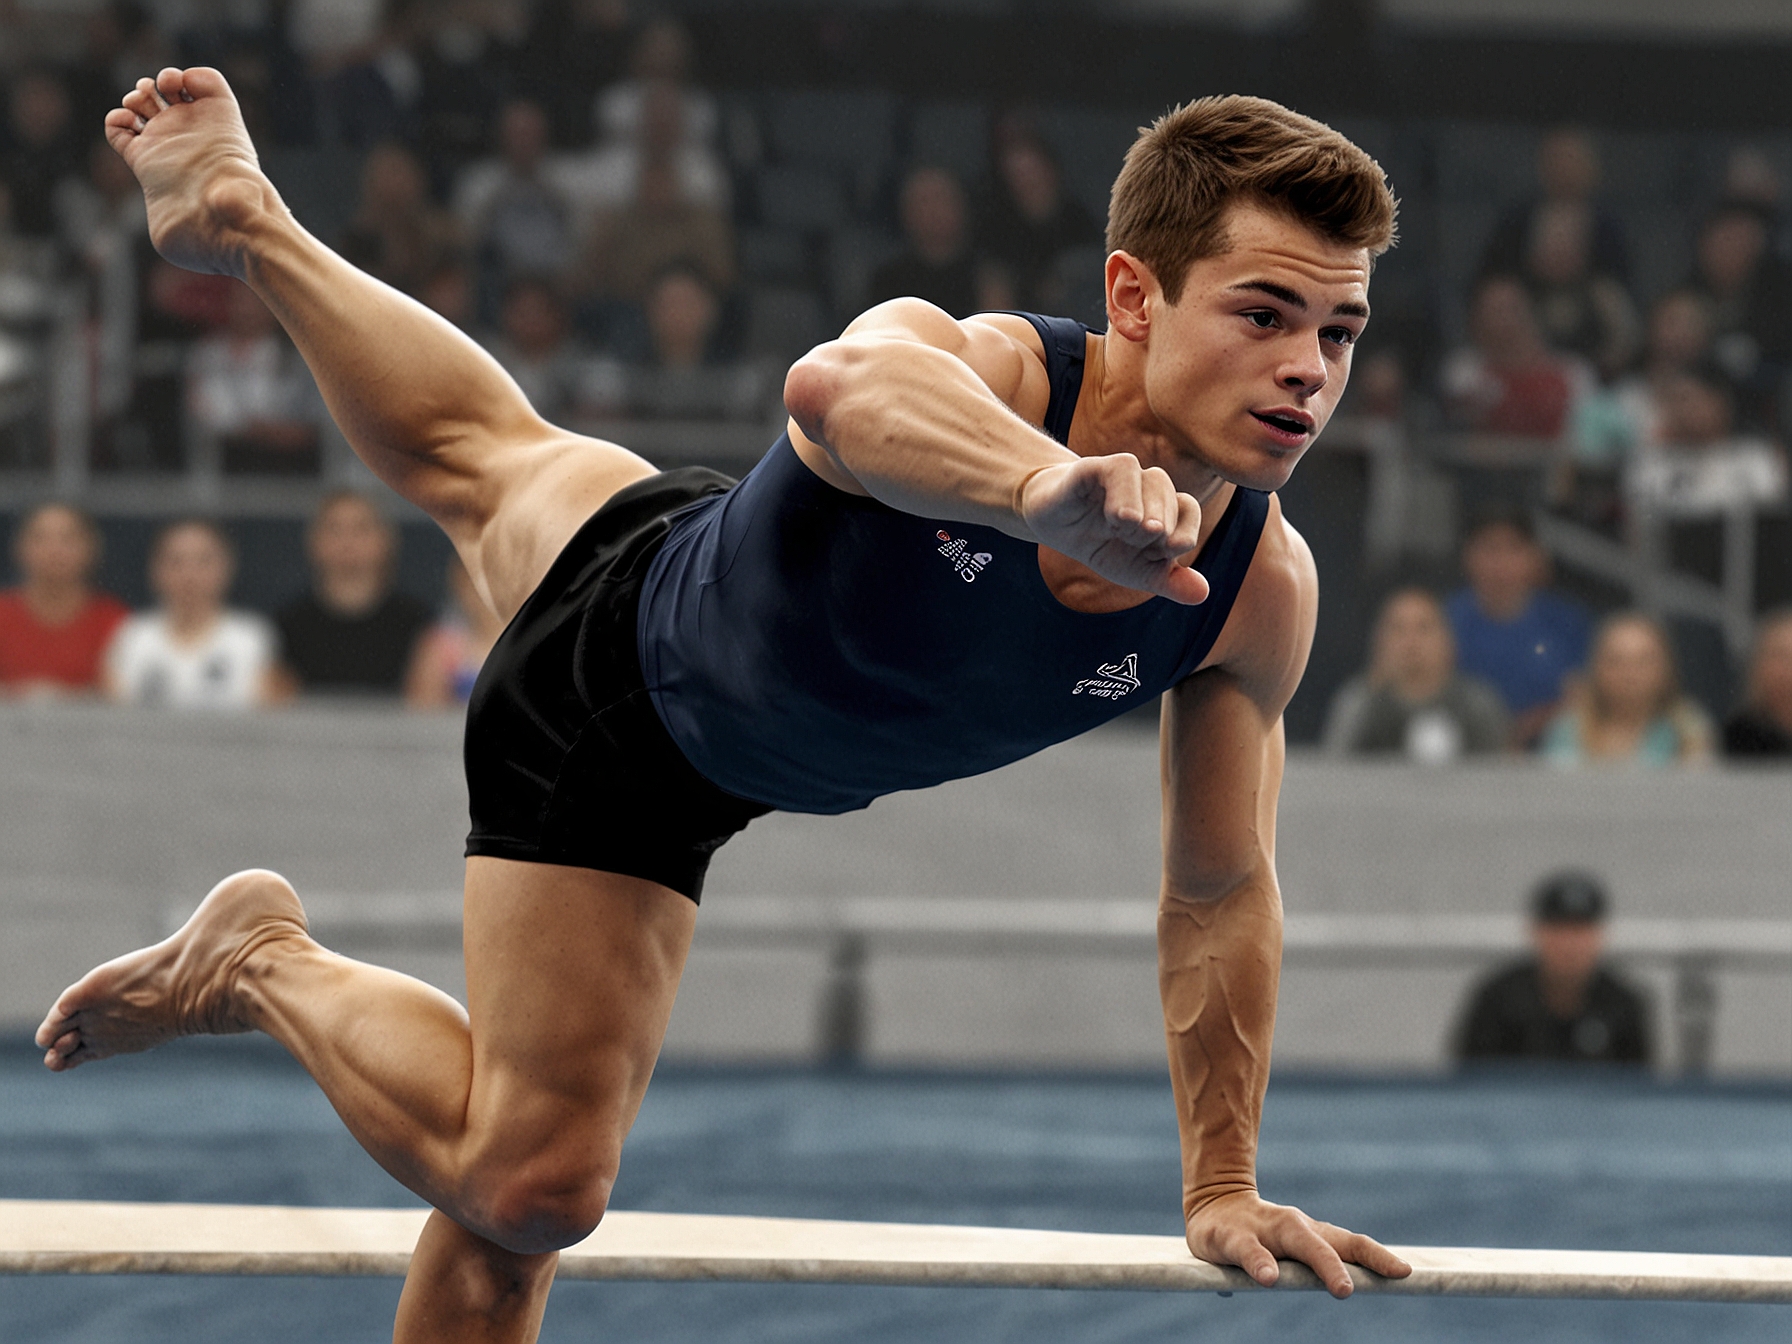 Brody Malone delivers a powerful floor exercise routine during Day 1 of the U.S. gymnastics trials, captivating the audience with his strength, balance, and flawless execution.